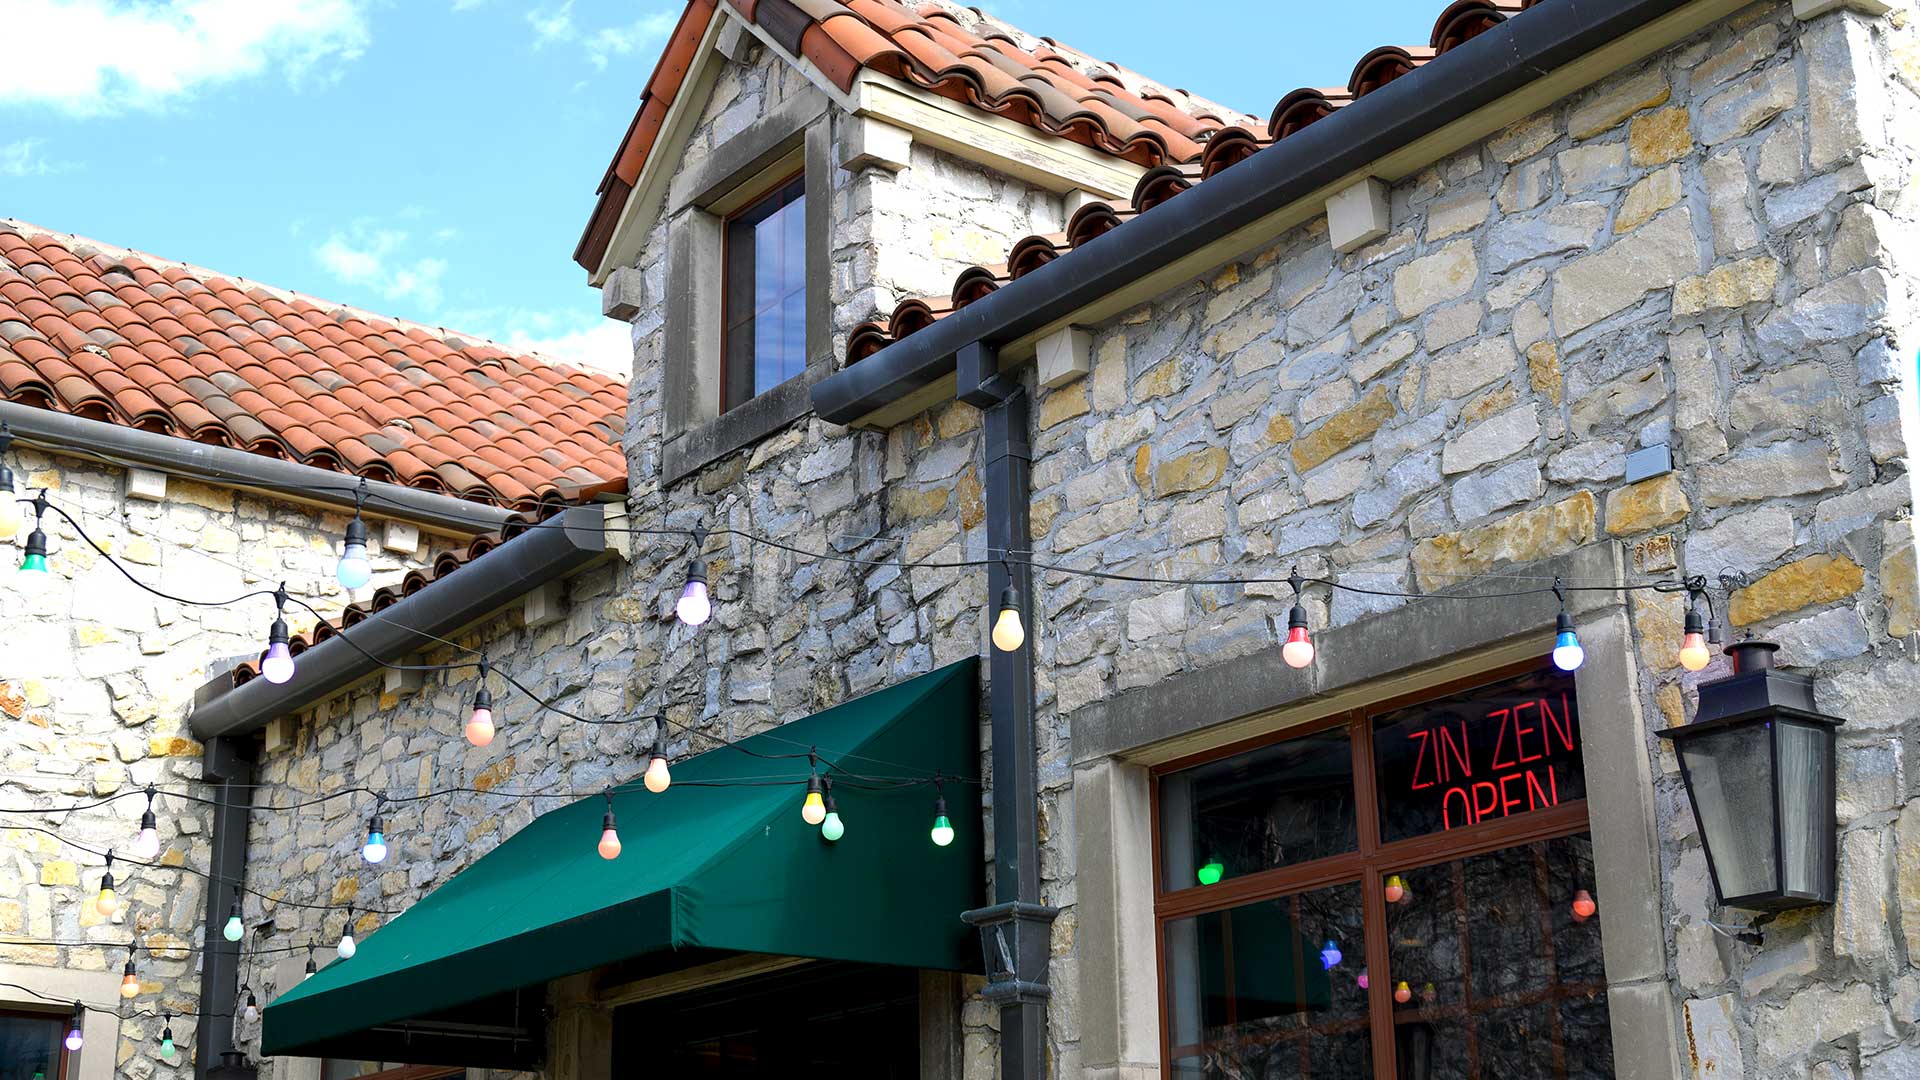 A close up look at the exterior of a restaurant at Adriatica. The building is stone with a green awning over the door. Several lights hang from strings across the walkway.